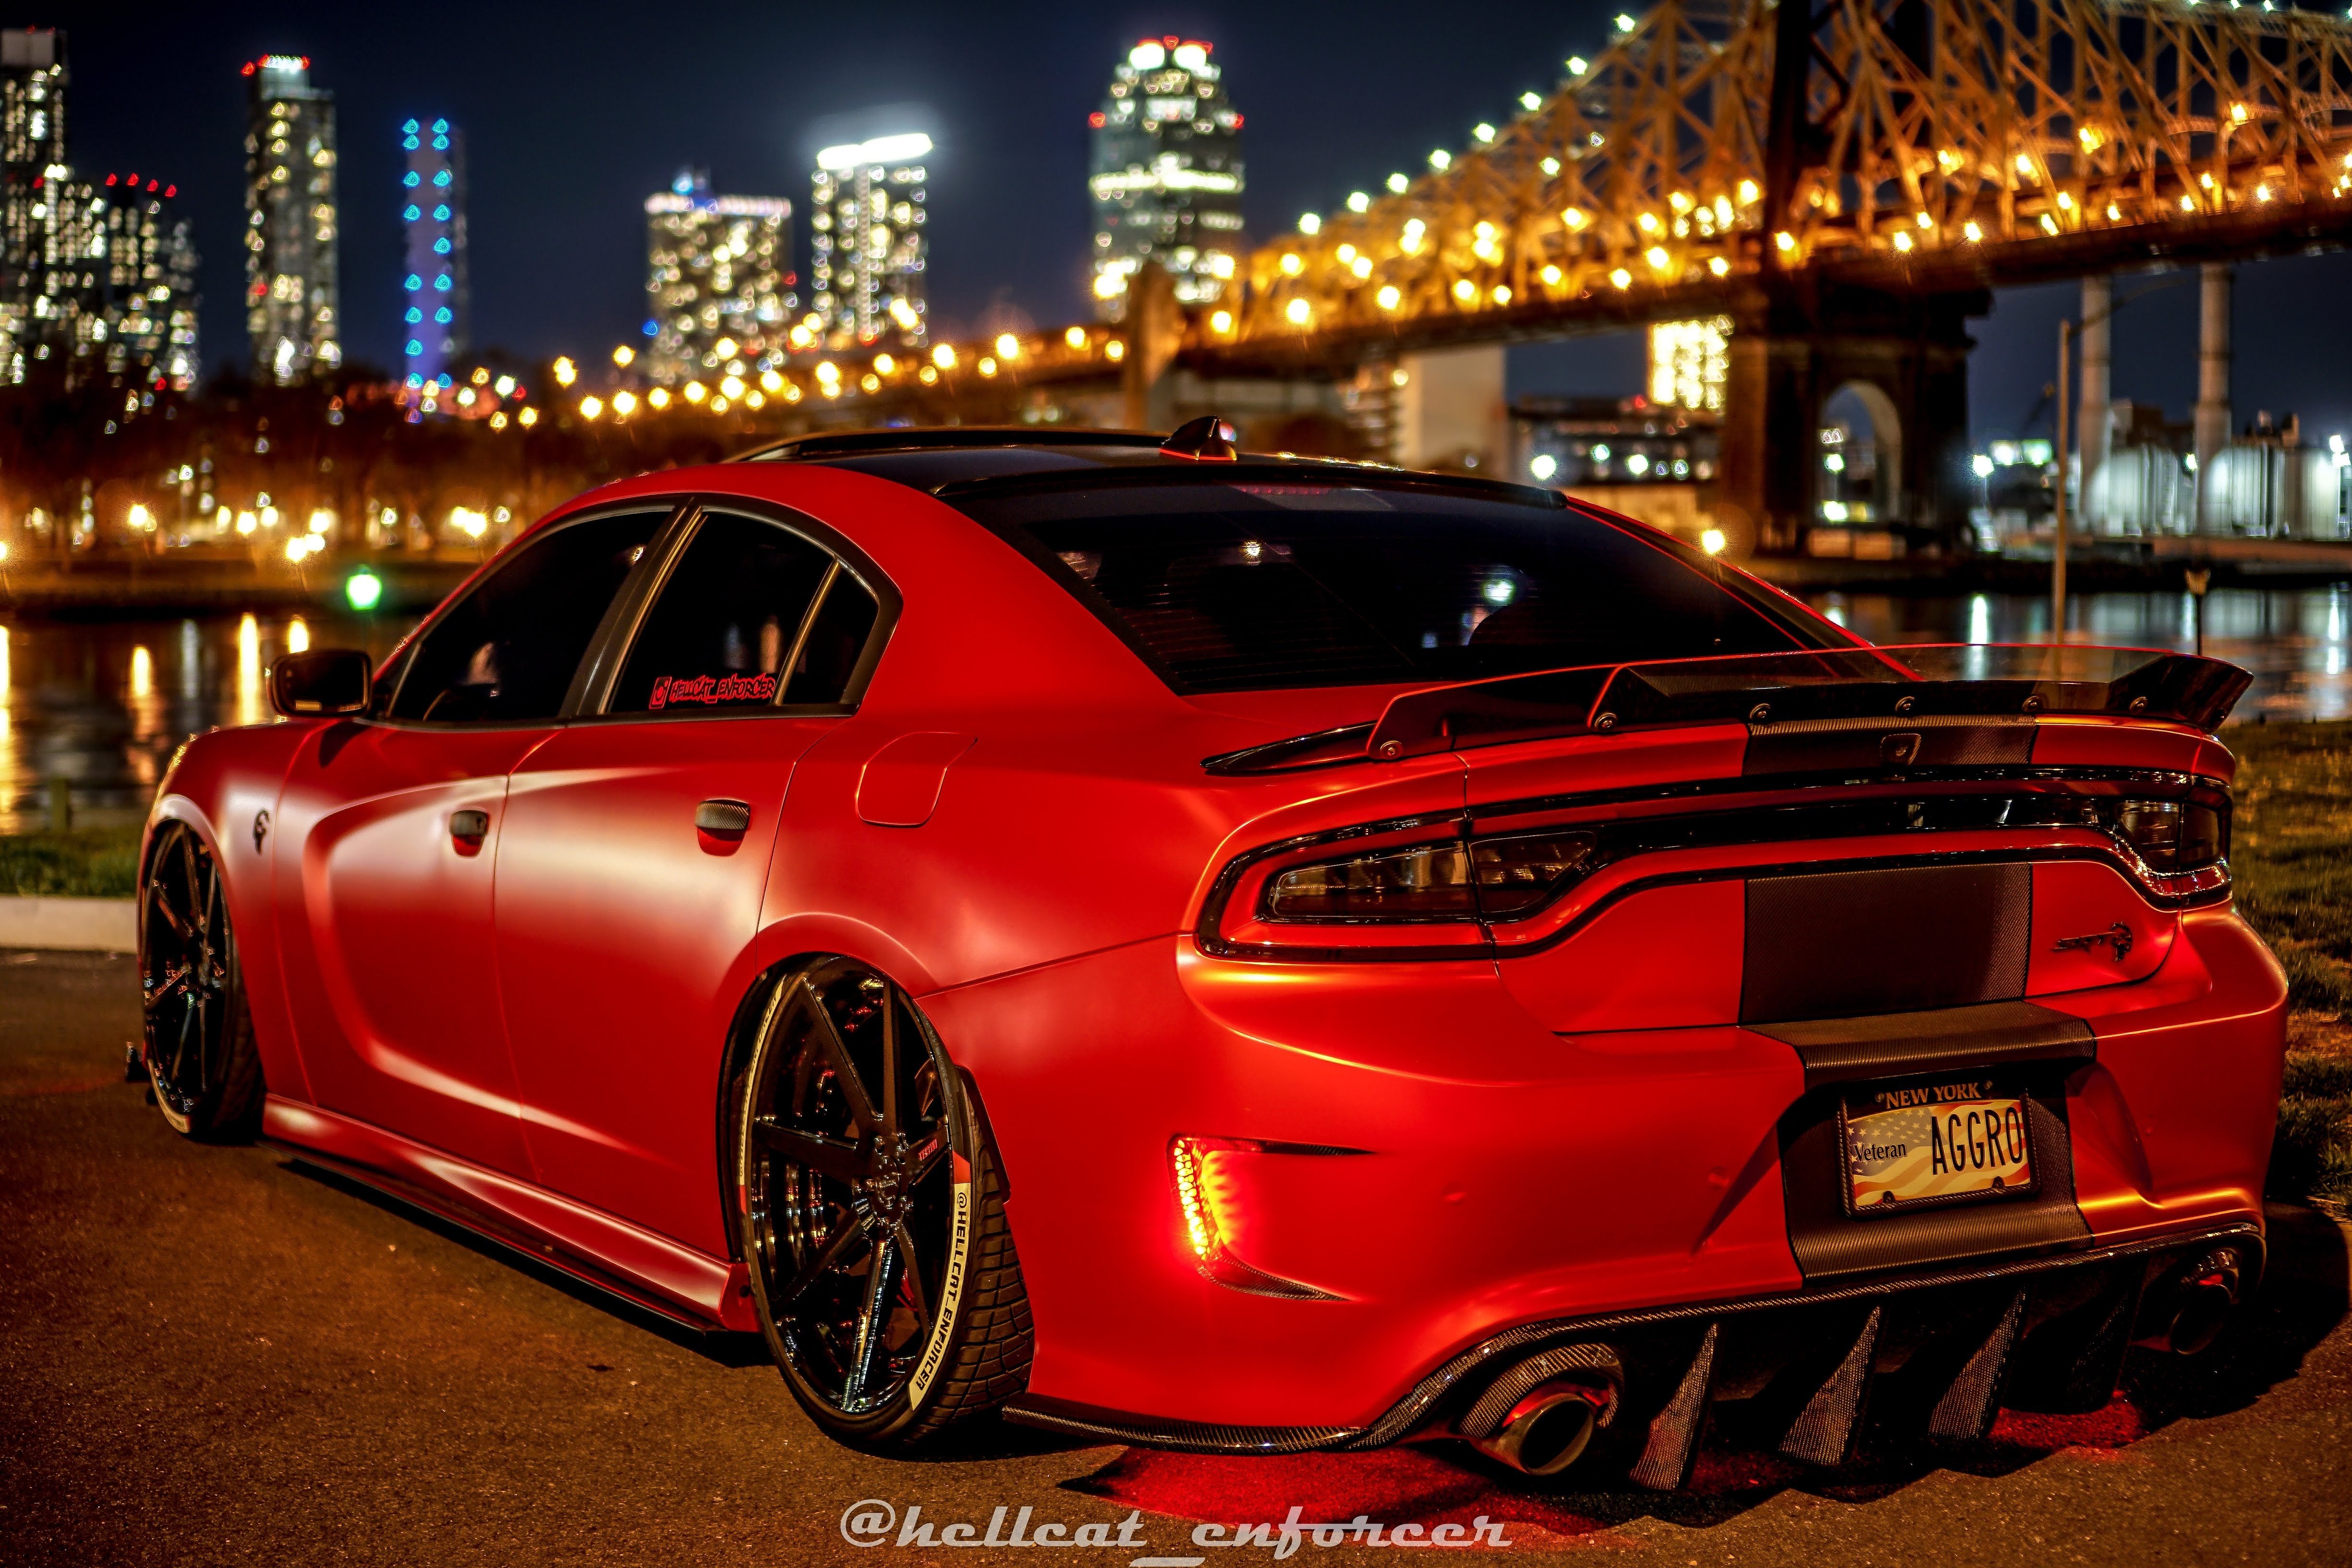 Carbon Fiber Rear Diffuser on Red Dodge Charger SRT - Photo by @hellcat_enforcer